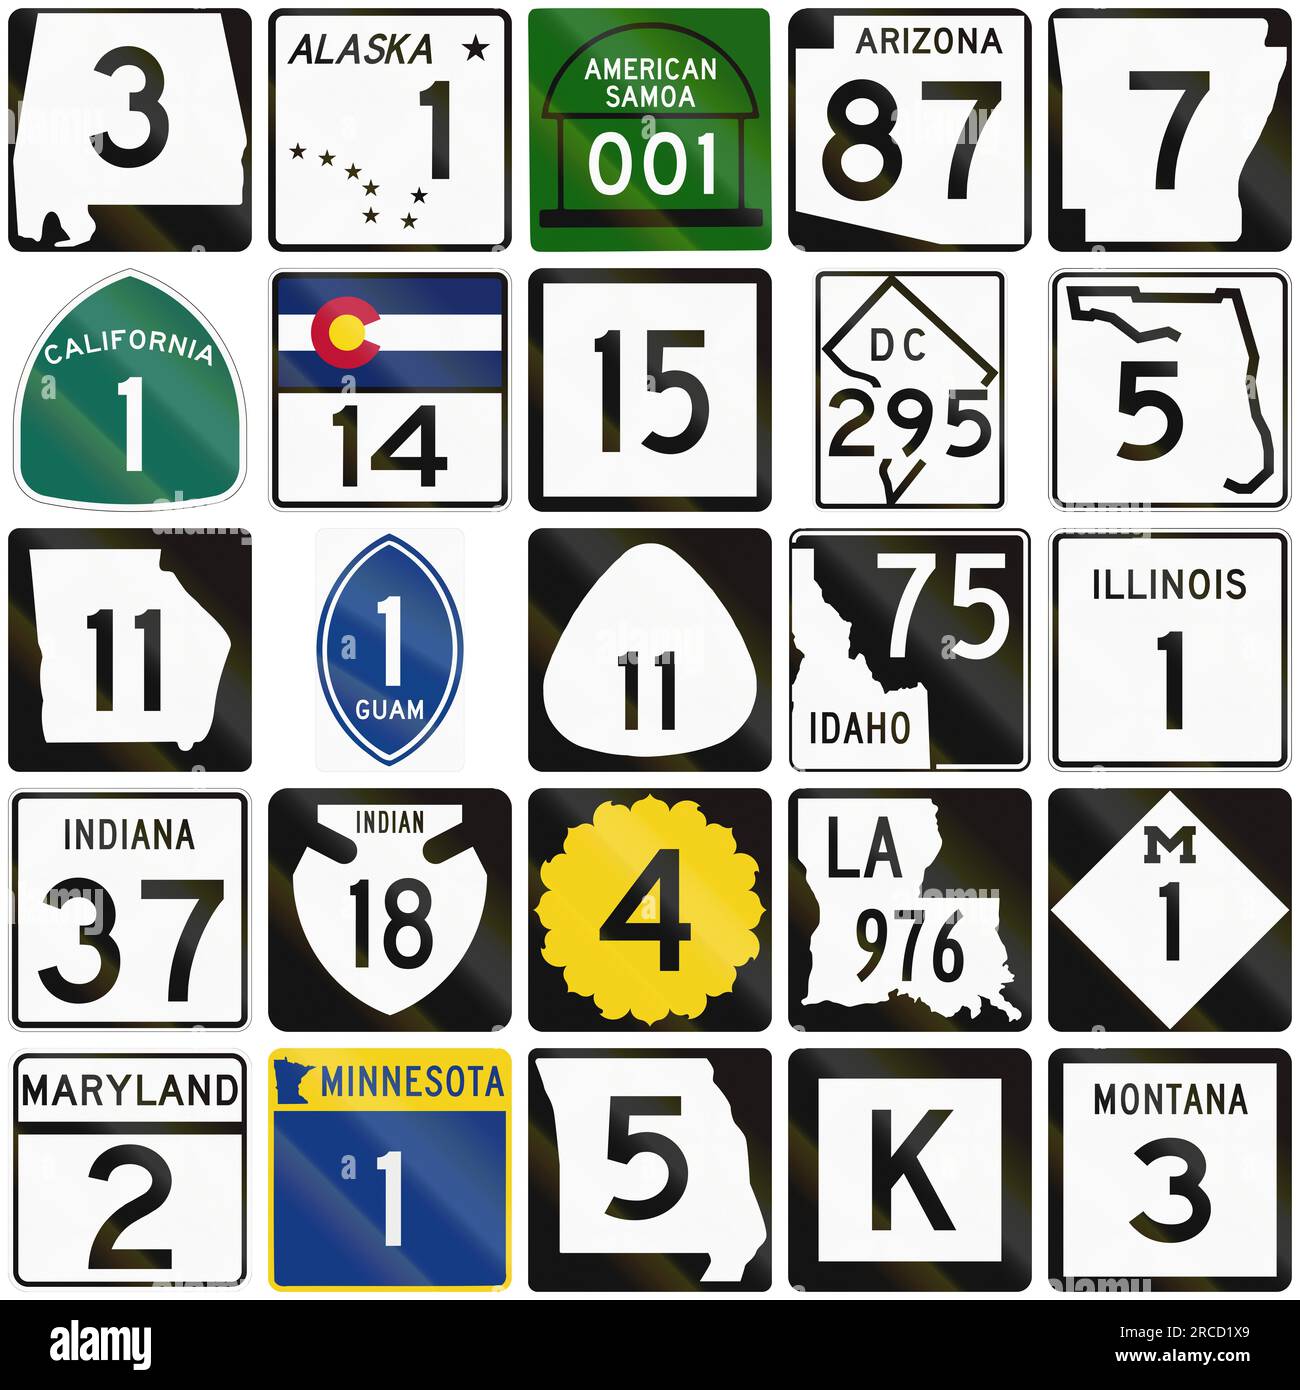 Collection of numbered road signs used in the USA. Stock Photo